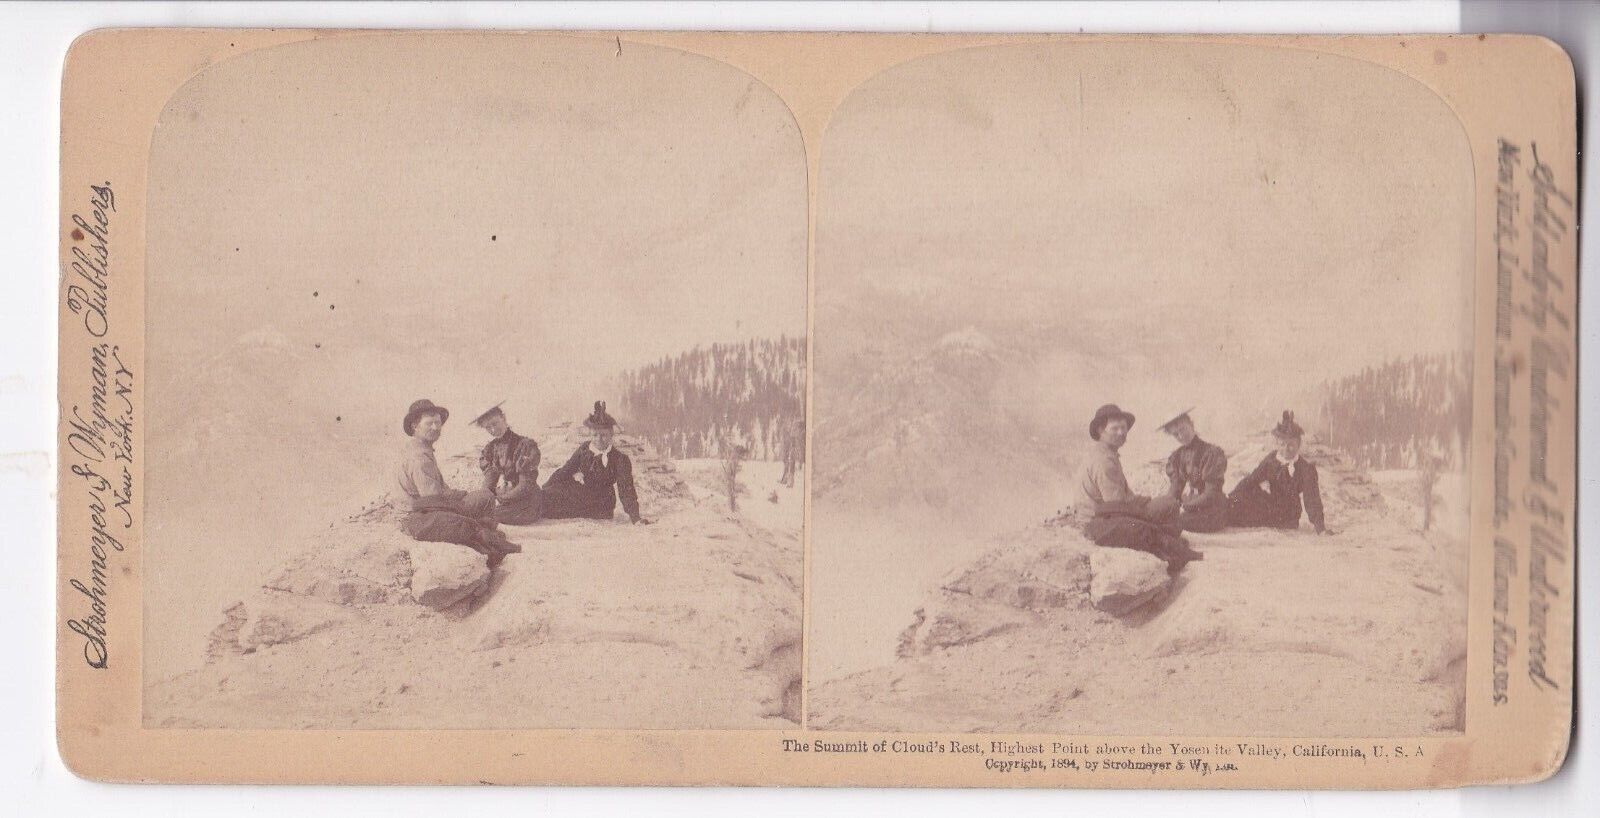 STEREOVIEW SUMMIT OF CLOUDS REST,HIGHEST POINT ABOVE YOSEMITE VALLEY CA,1894 